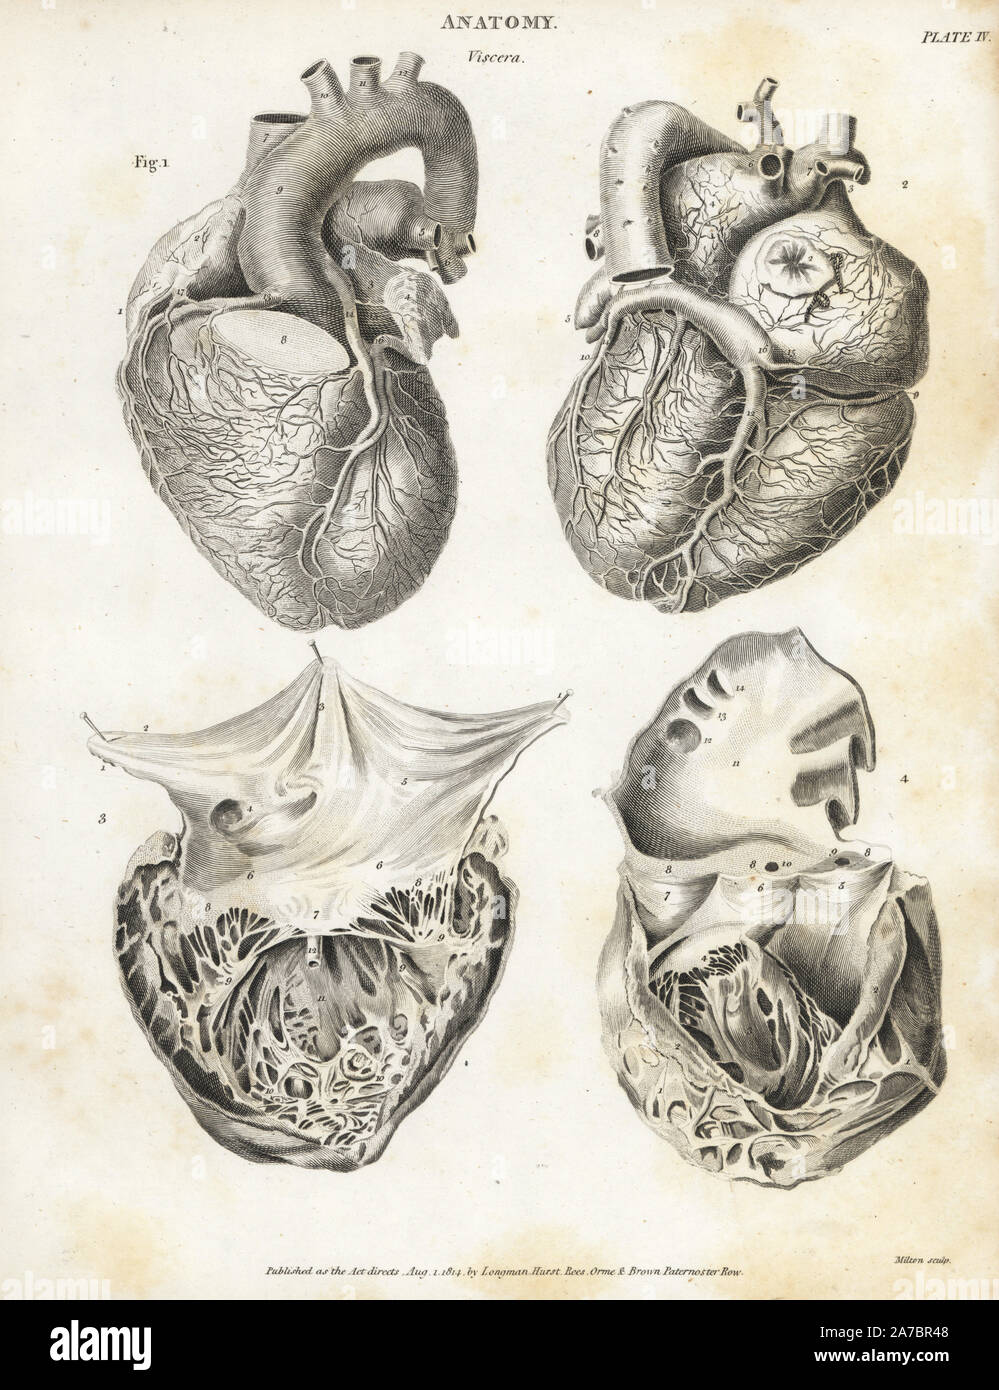 Anatomy of the human heart. Copperplate engraving by Milton from Abraham Rees' Cyclopedia or Universal Dictionary of Arts, Sciences and Literature, Longman, Hurst, Rees, Orme and Brown, London, 1820. Stock Photo